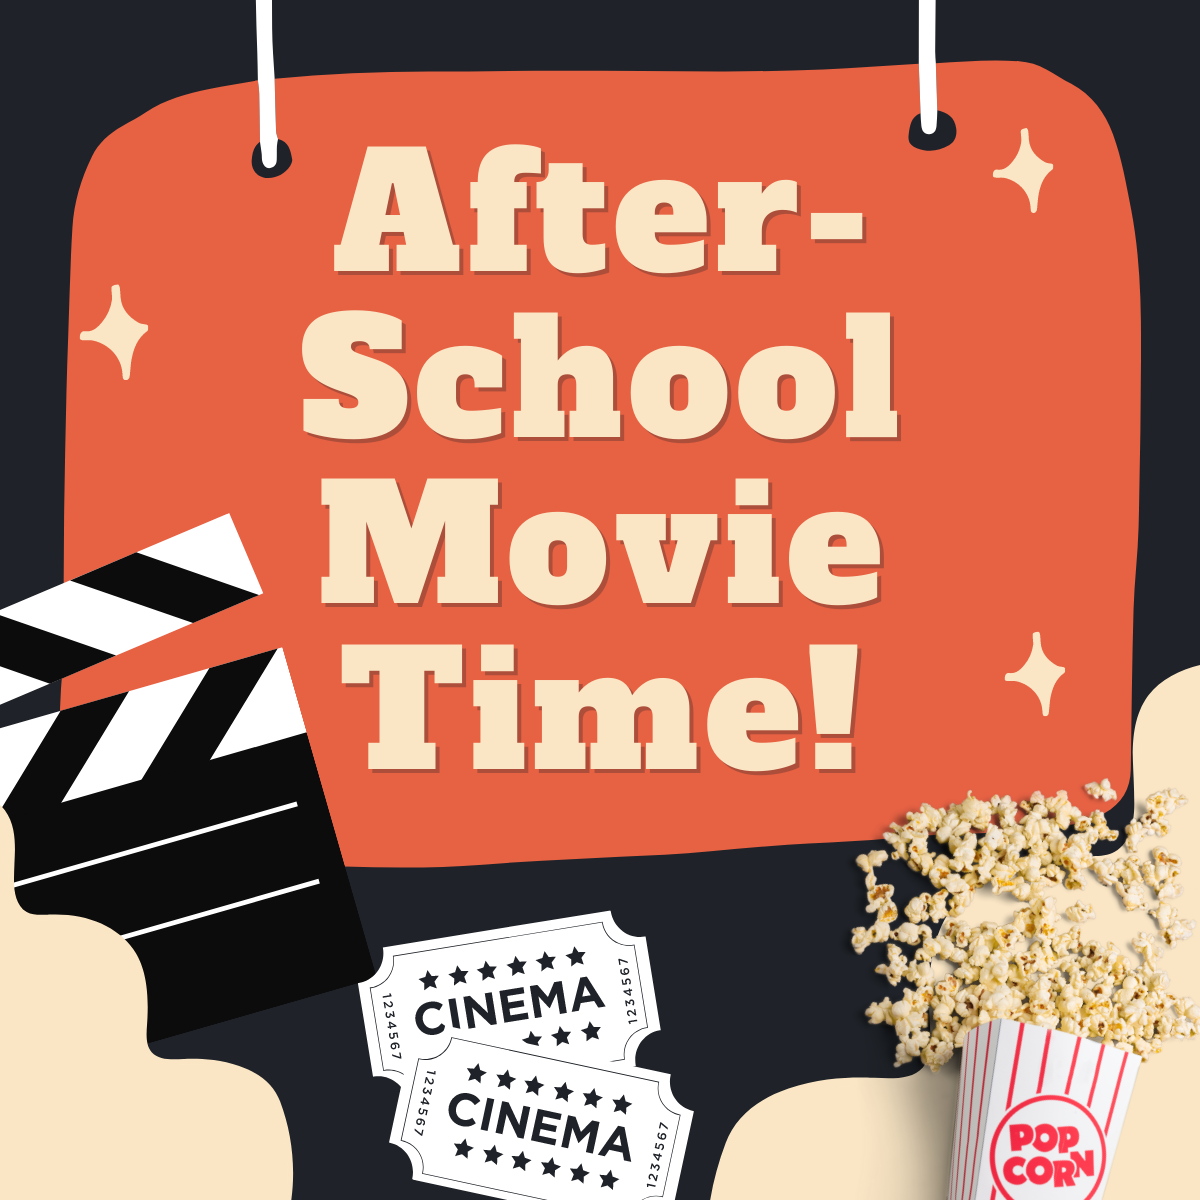 black background, orange box with beige letters inside says Please join us for after school movie time. Image of popcorn, movie tickets and movie clapper surround the orange box.